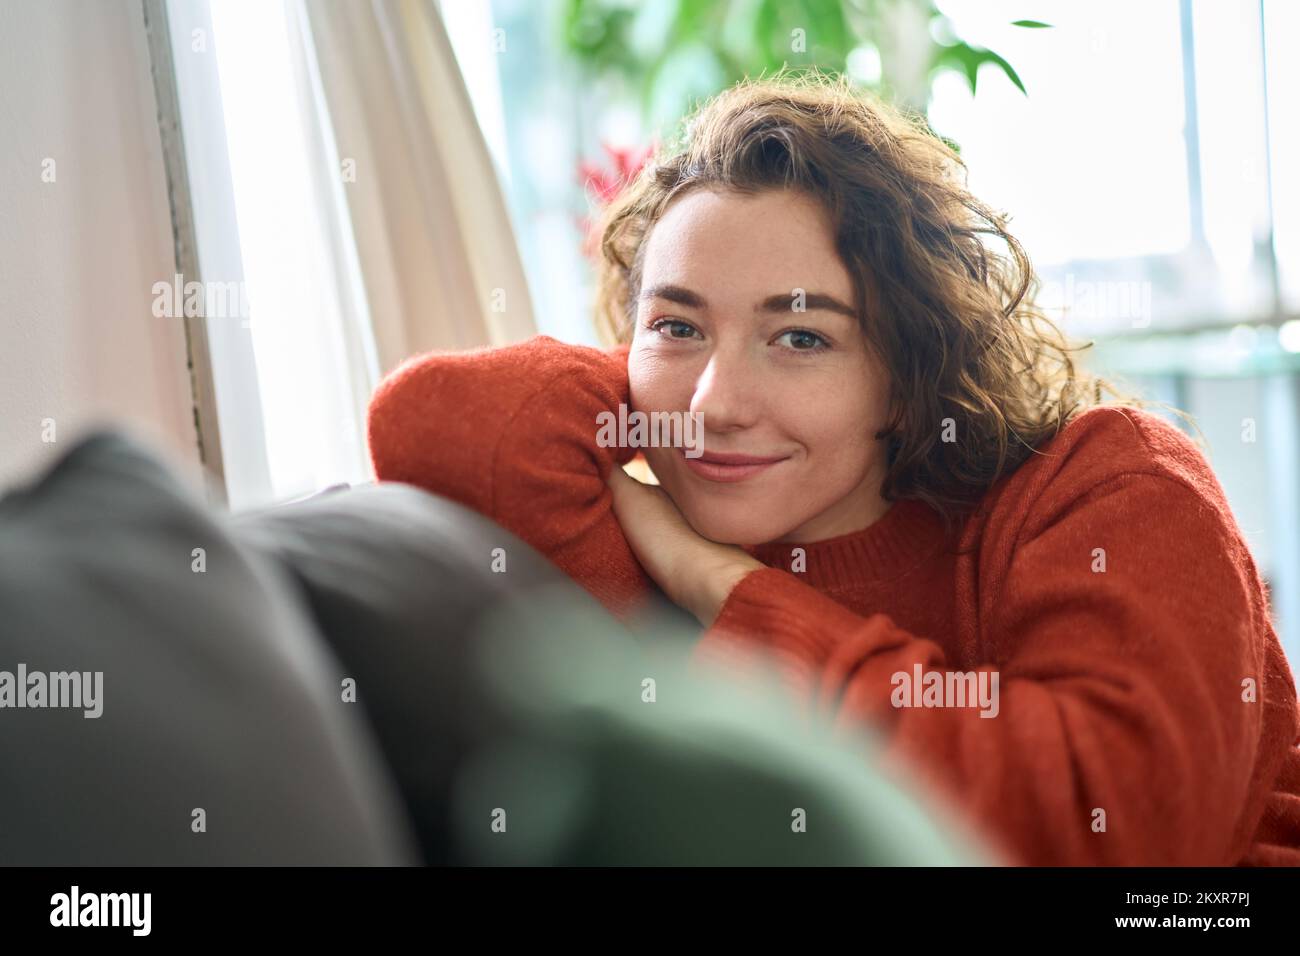 Young happy pretty woman relaxing sitting on couch at home. Portrait Stock Photo